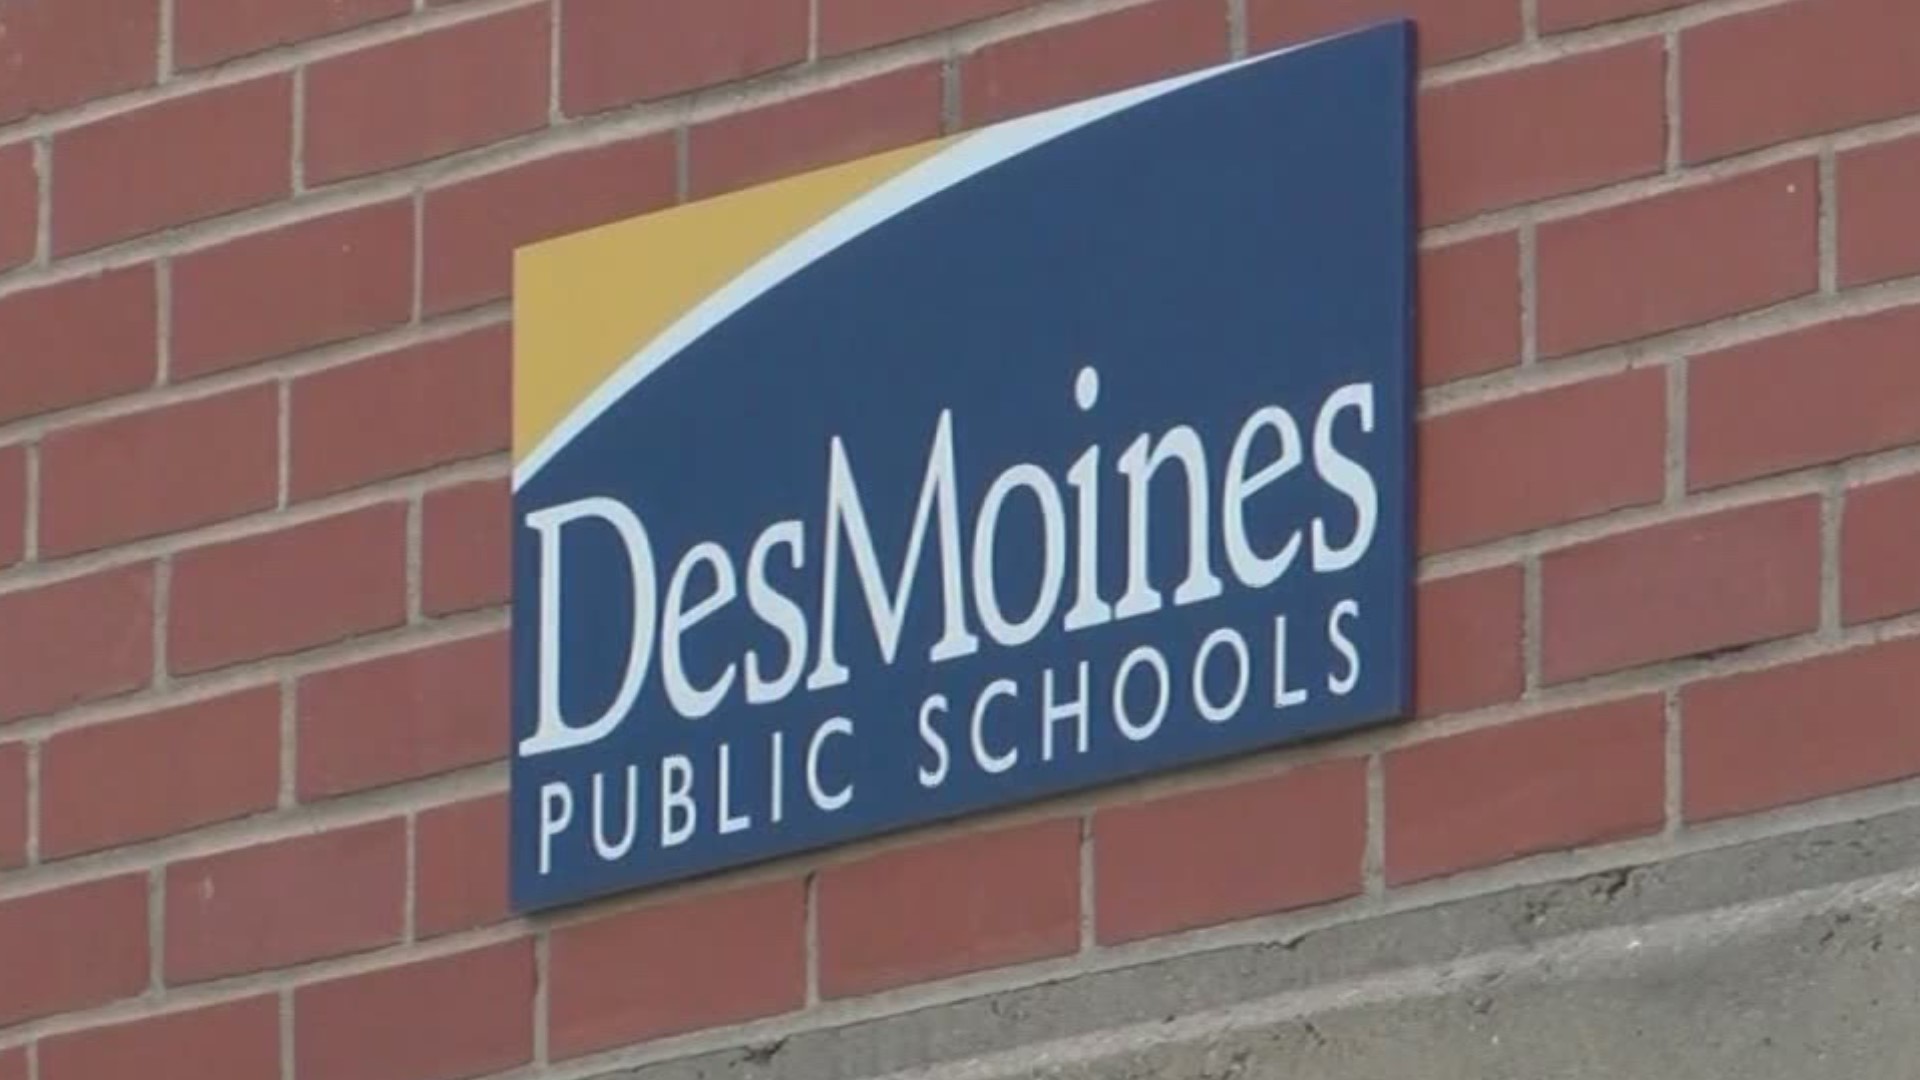 DMPS is opening discussion for the plan on Feb. 28 in the North High School library at 7 a.m. and later again that night at Roosevelt High School.